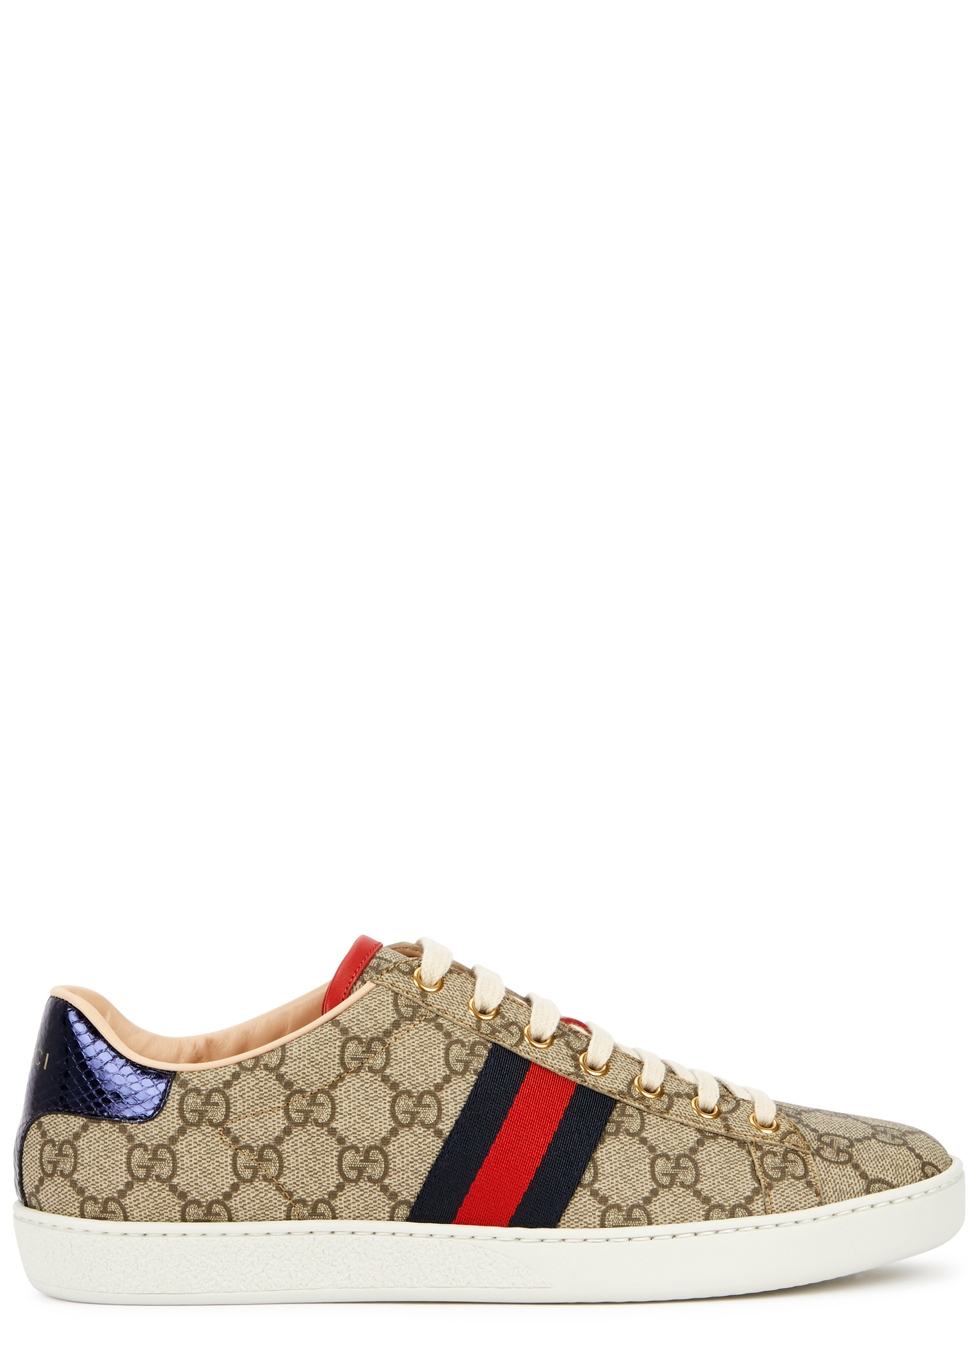 Gucci New Ace GG Supreme taupe sneakers 